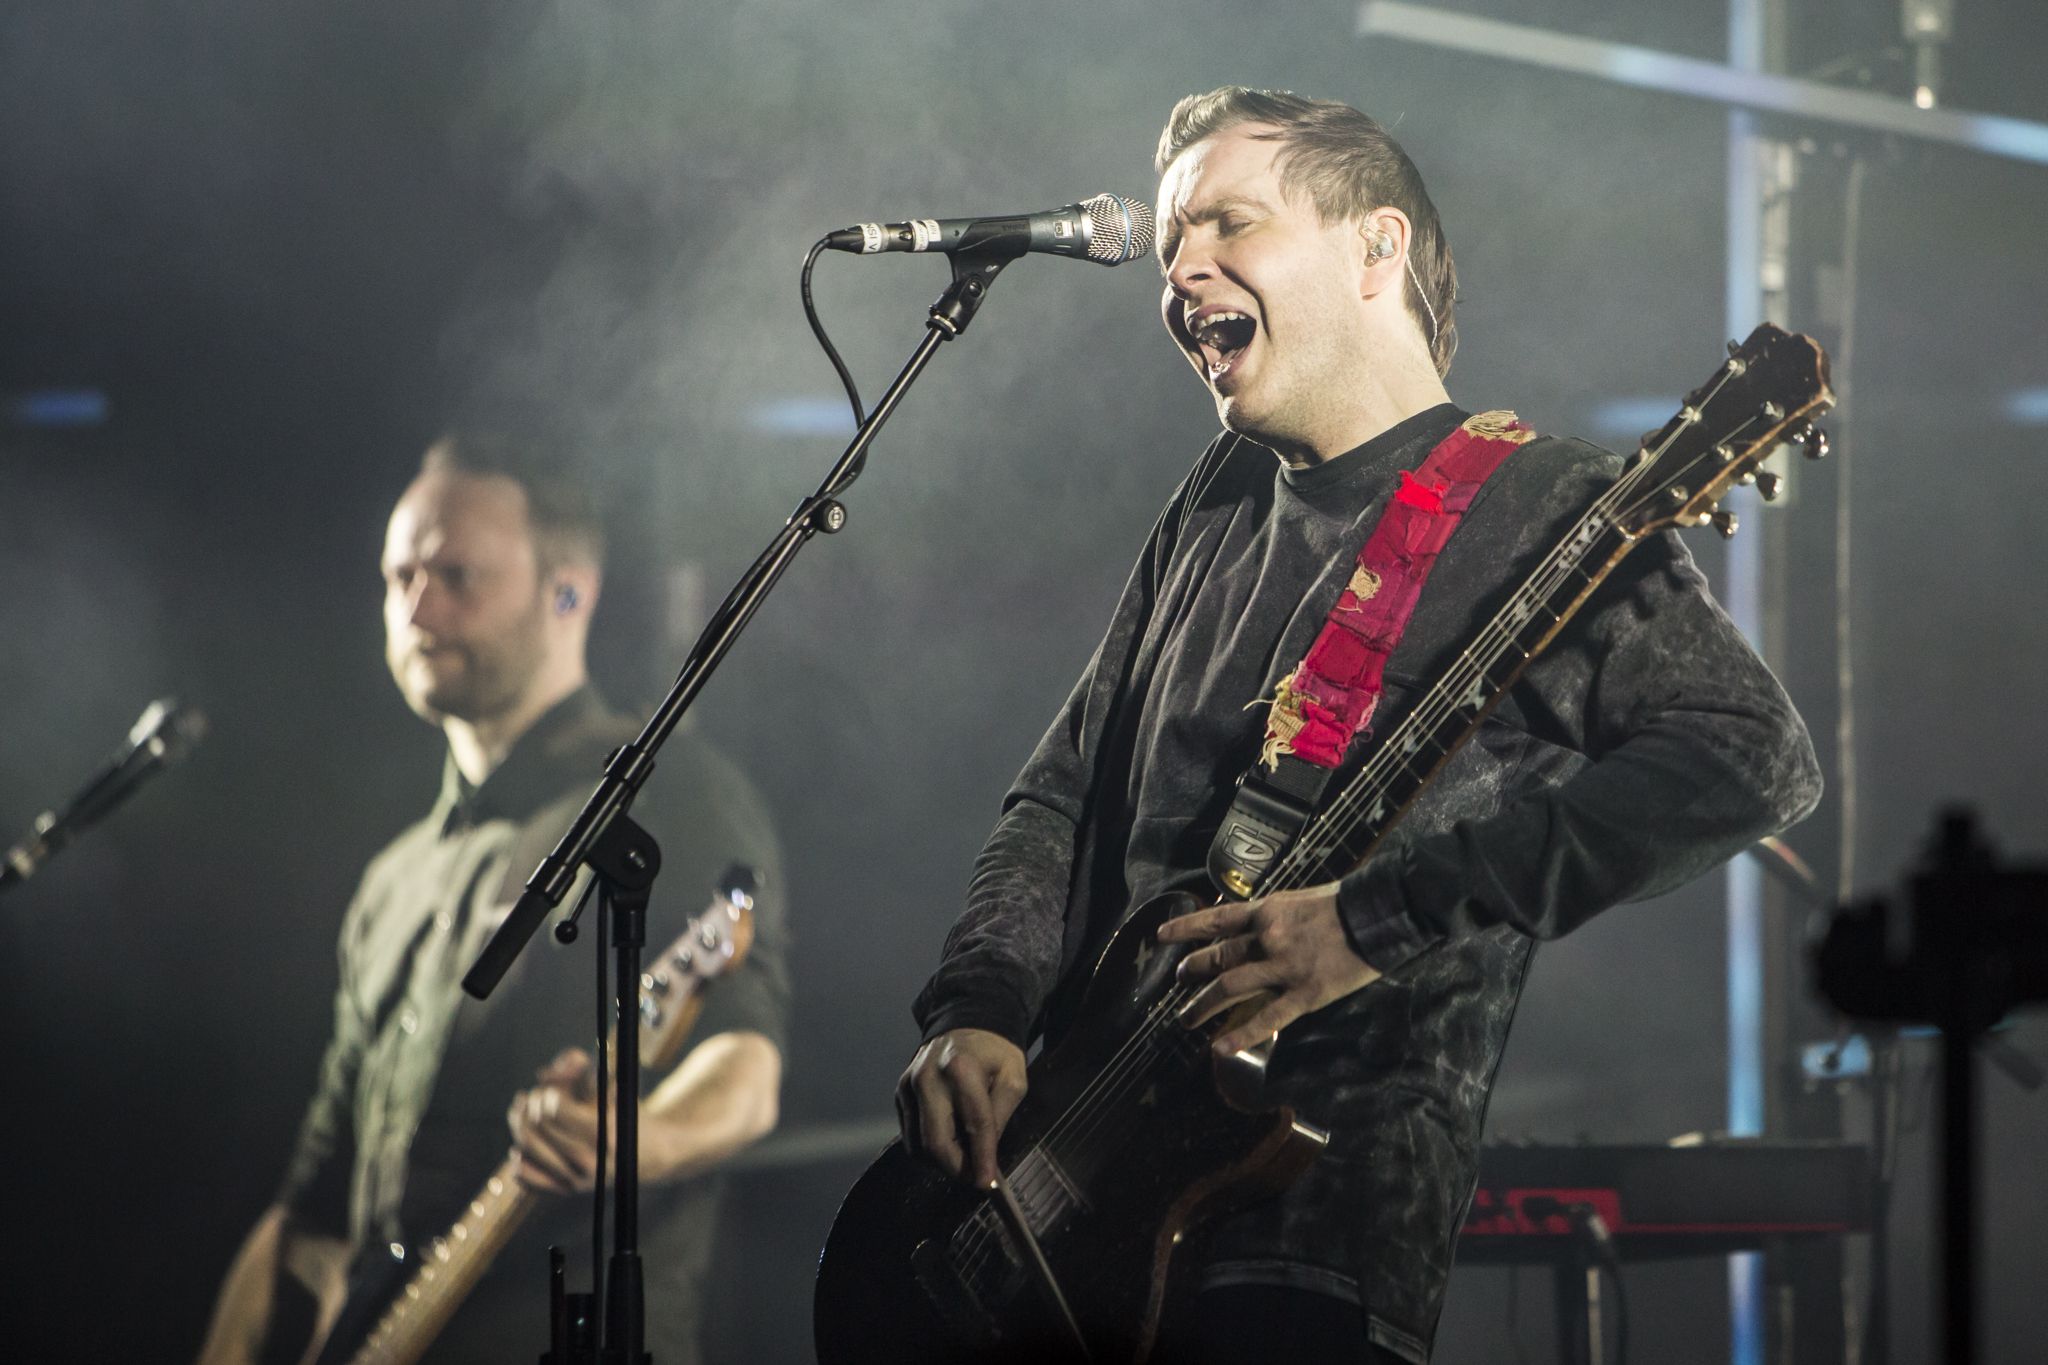 sigur ros 6 Live Review: Sigur Rós at the Fox Theater in Pomona (4/10)